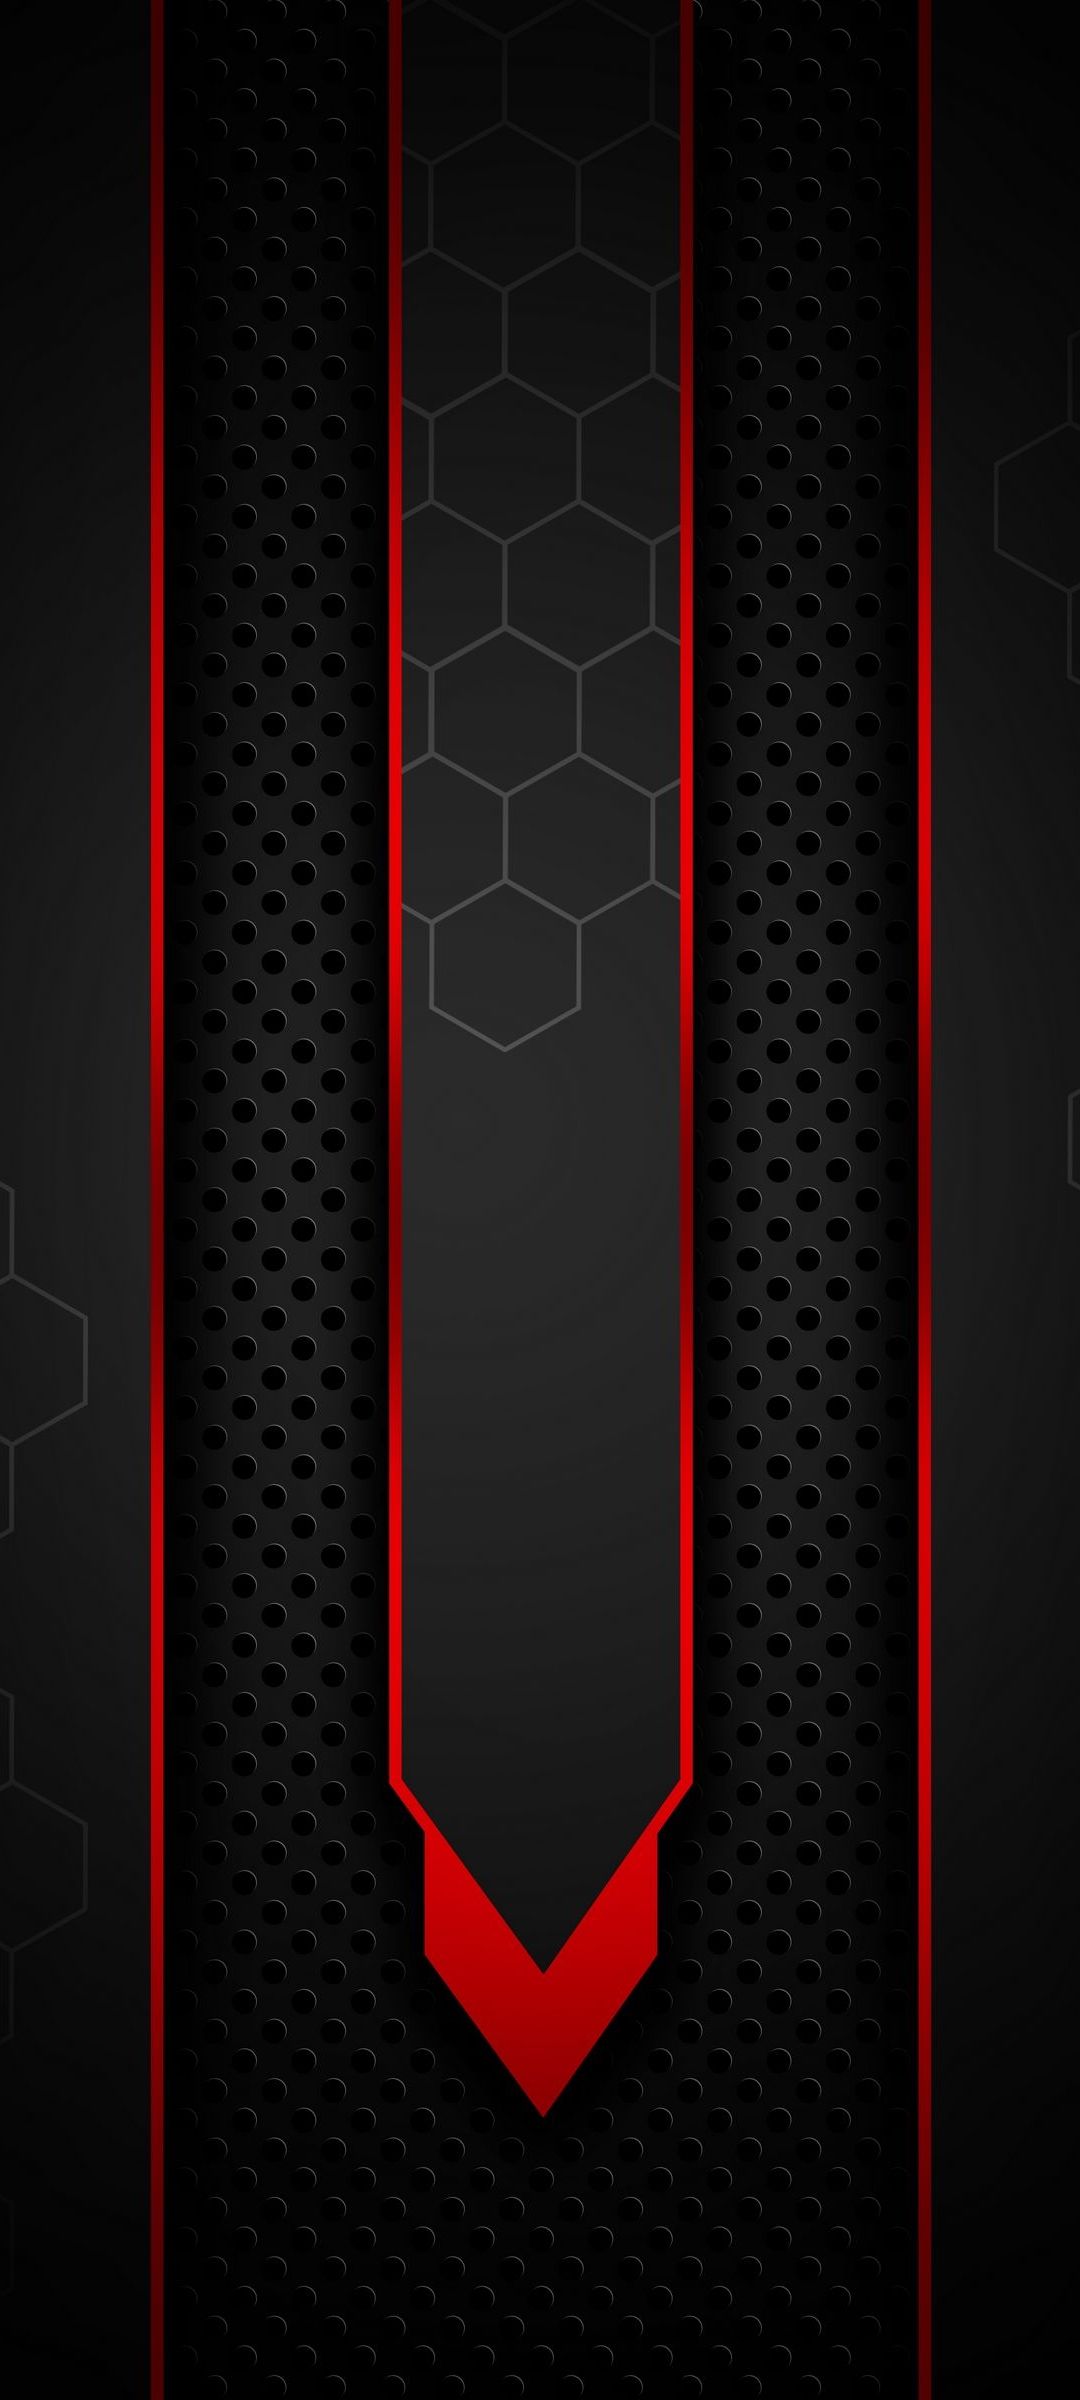 Black and Red Gaming Wallpapers  Top Free Black and Red Gaming Backgrounds   WallpaperAccess